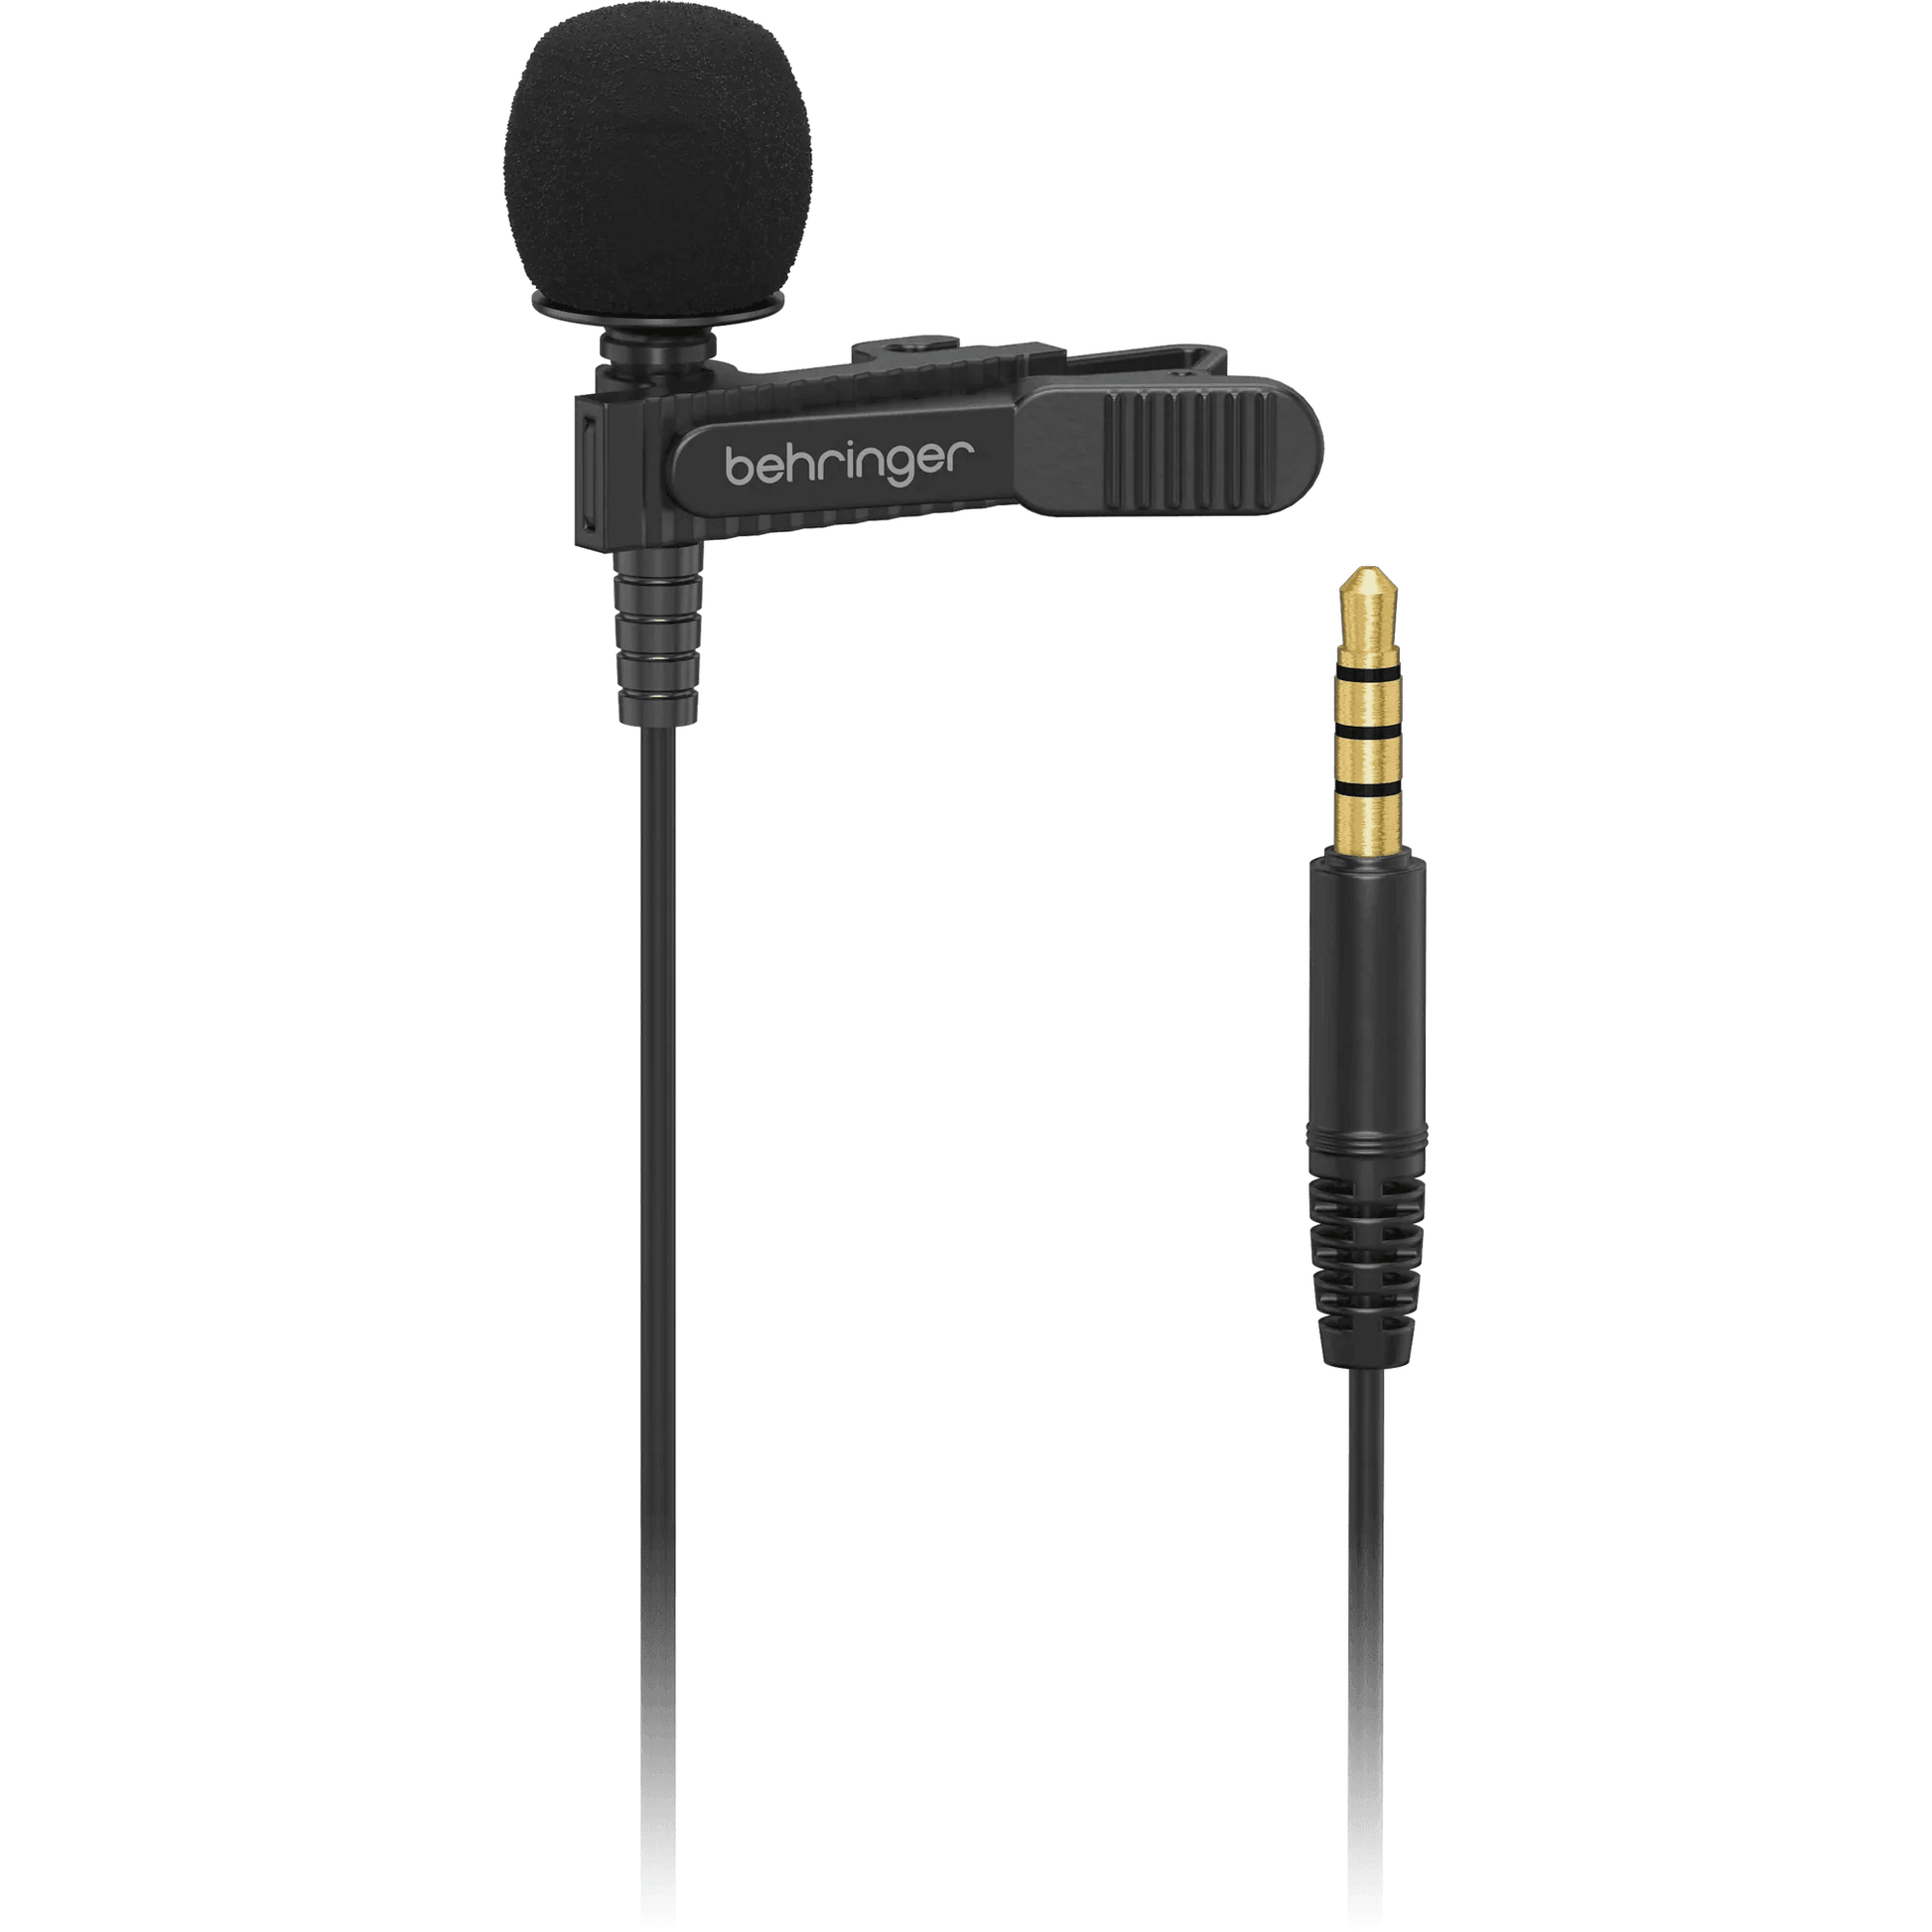 Behringer BC LAV Lavalier Microphone for Mobile Devices